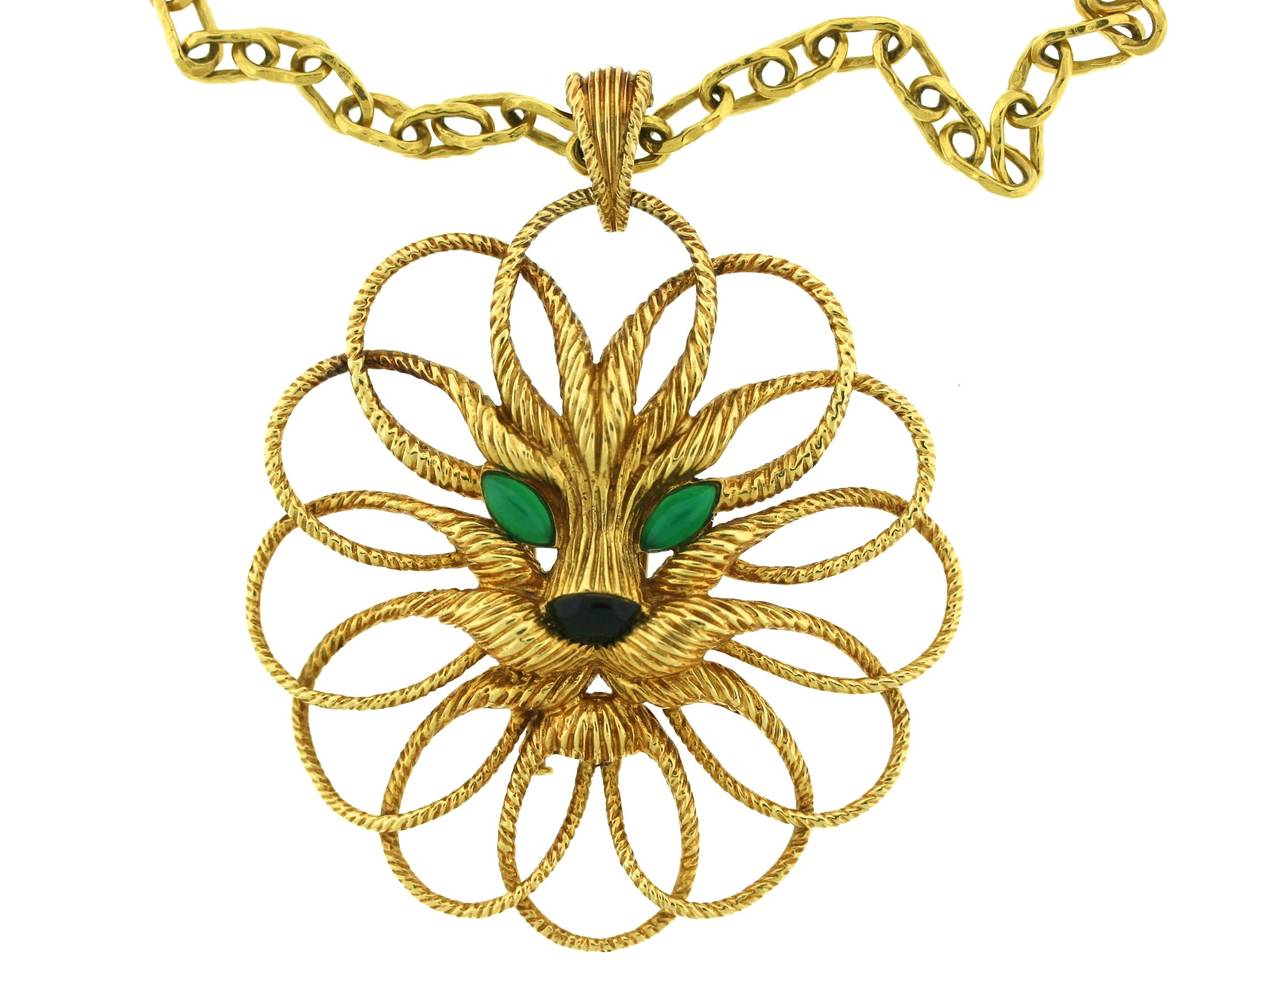 Van Cleef & Arpels 18k gold pendant designed as a circular-shaped lion's head with chrysoprase eyes and a black onyx nose suspended from a long hammered gold elongated oval link chain. The lion's mane and whiskers are worked into oval loops of